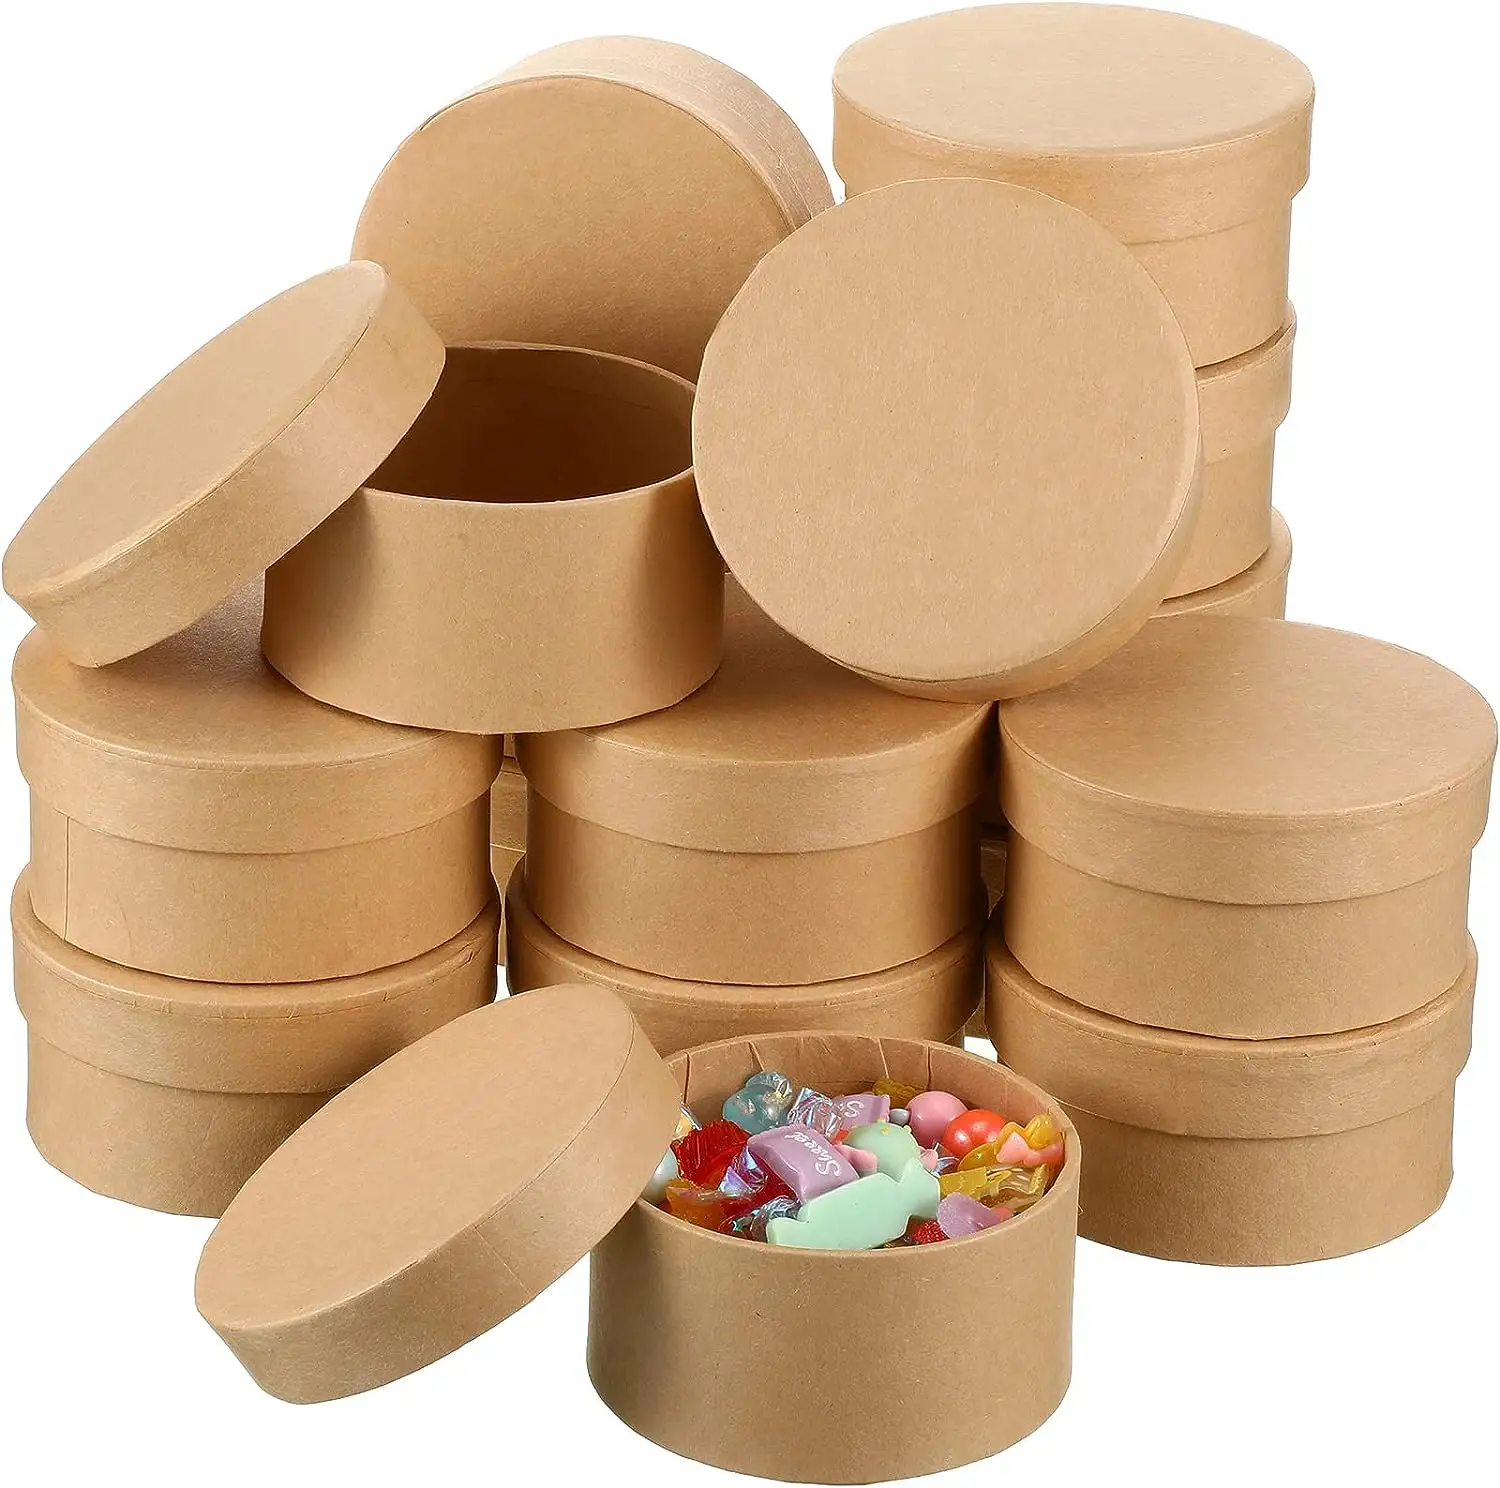 Round Paper Mache Box, Small Gift Box with Lid 3.9 Inch Nesting DIY Cardboard Craft Empty Boxes for Kids Adults